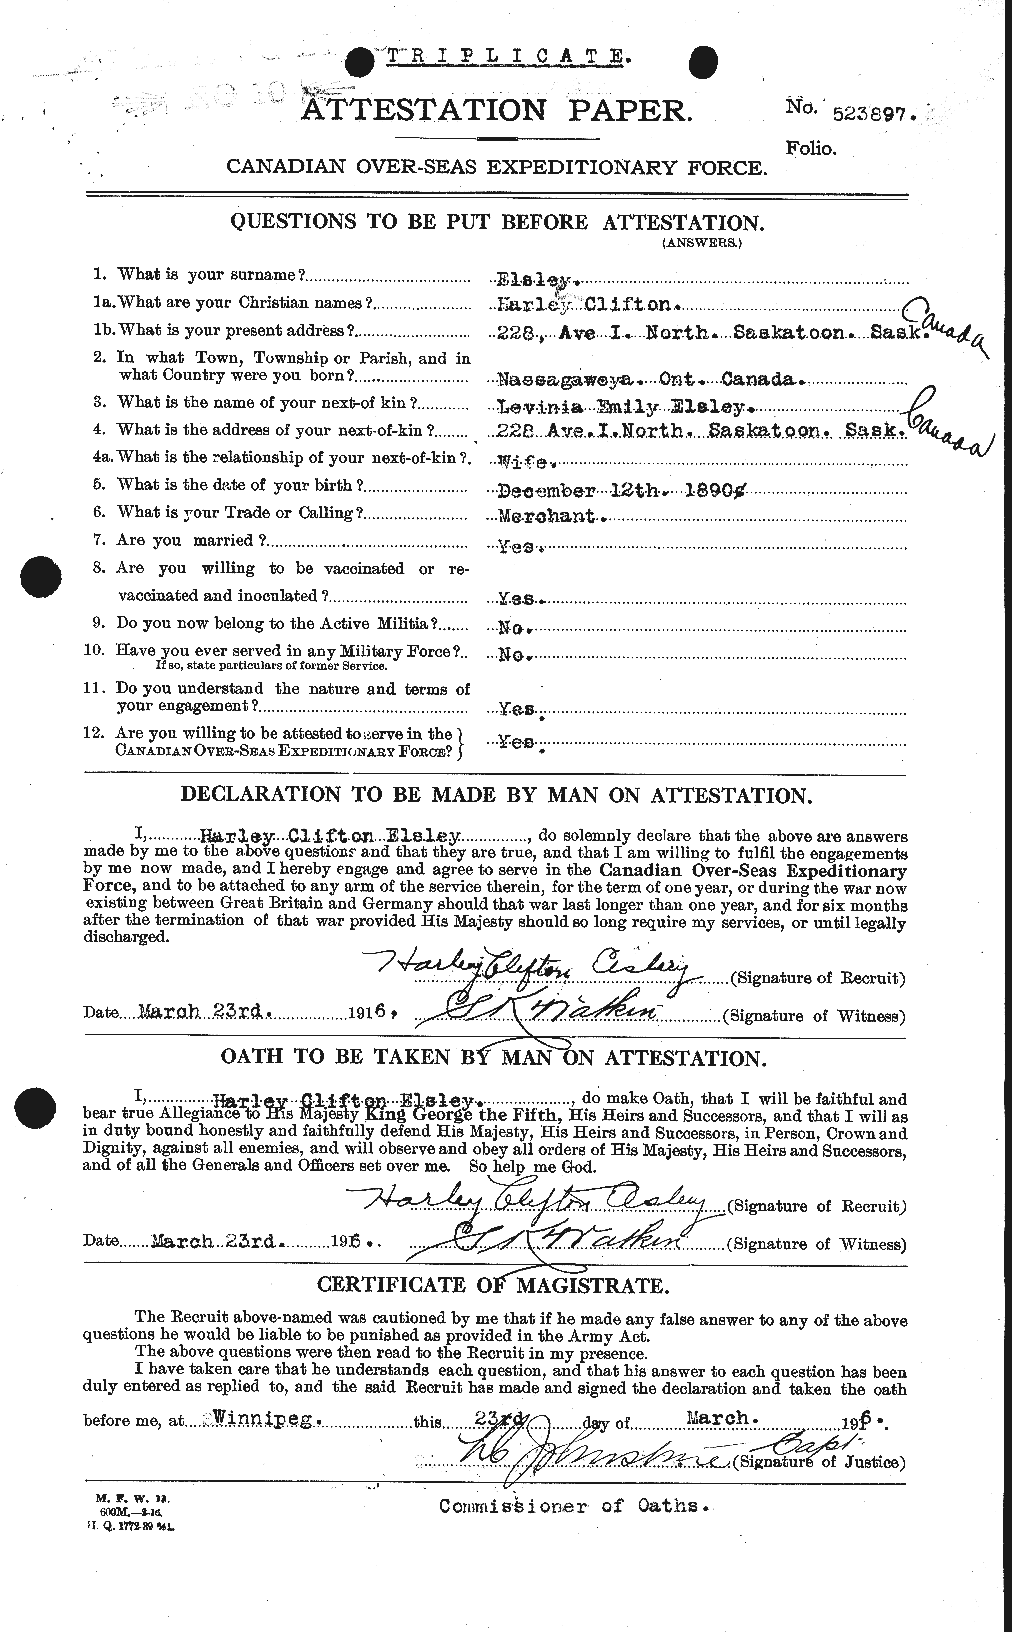 Personnel Records of the First World War - CEF 312815a